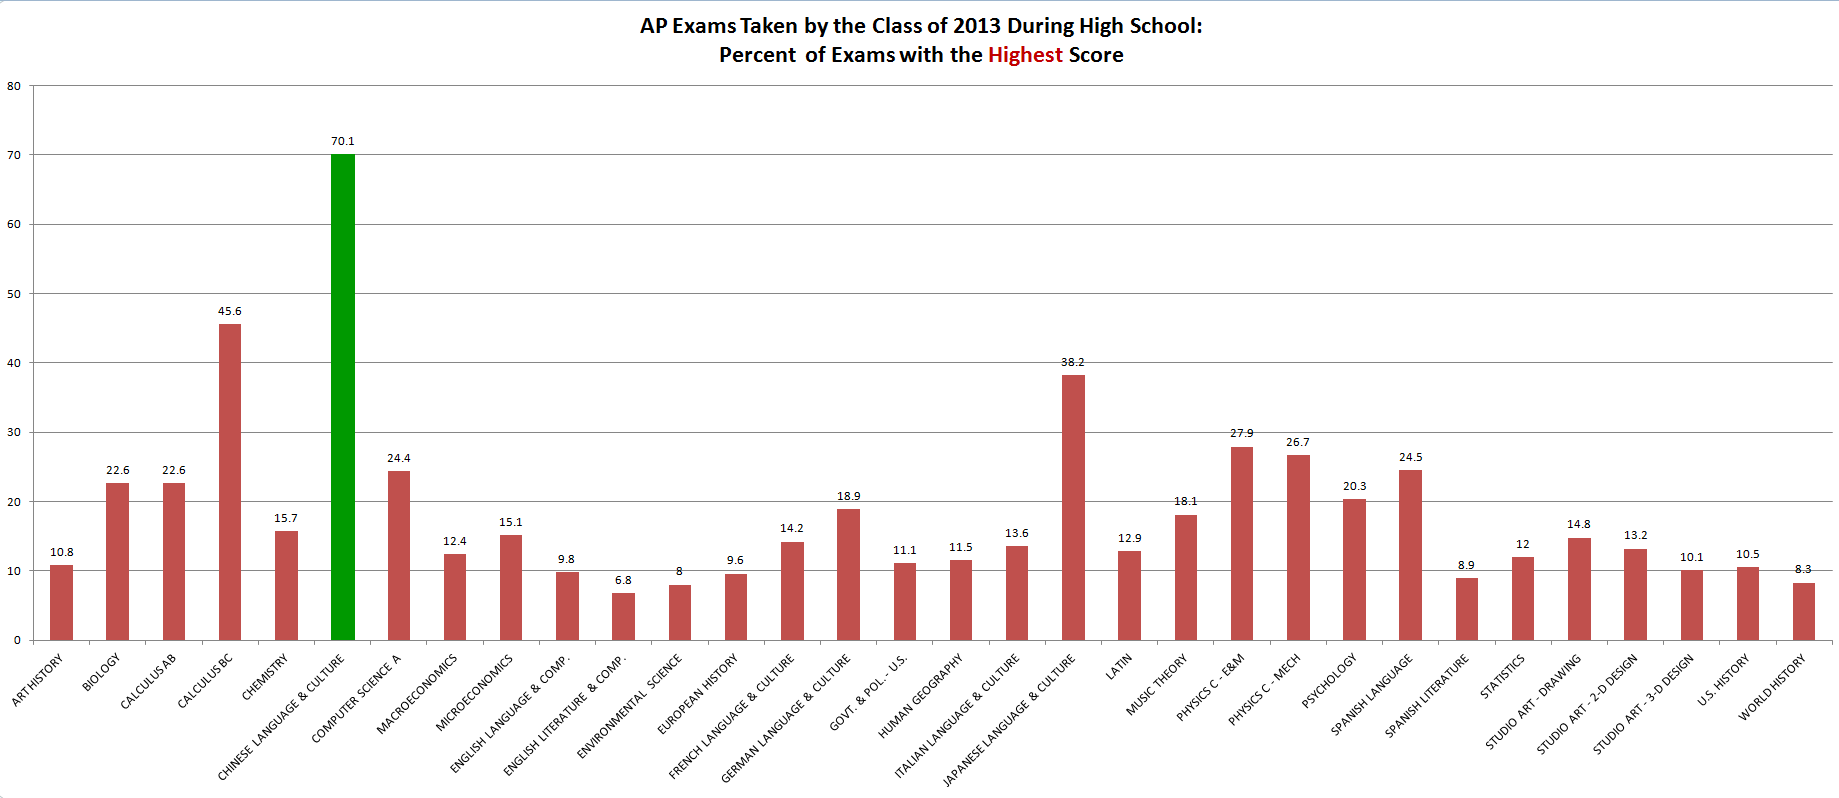 Advanced Placement exams, showing the percentages earning the top score on different AP tests